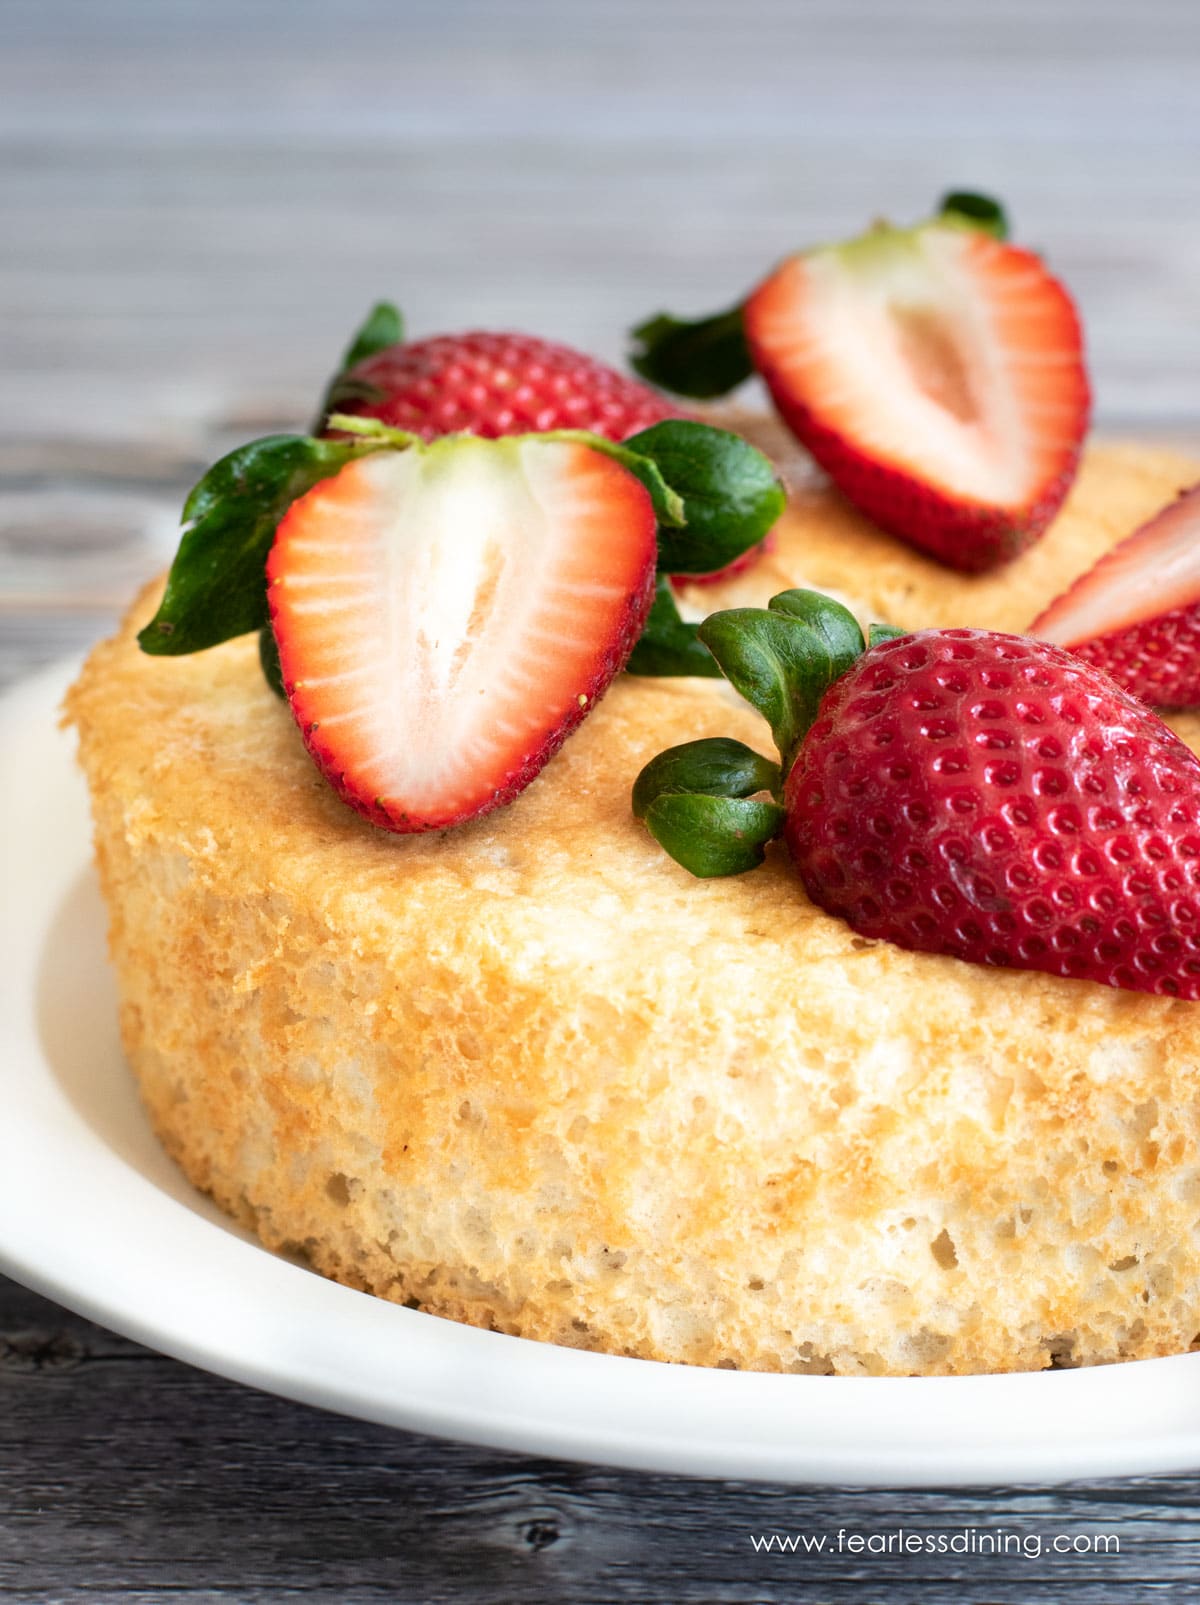 a side view of the angel food cake. It is topped with sliced strawberries.